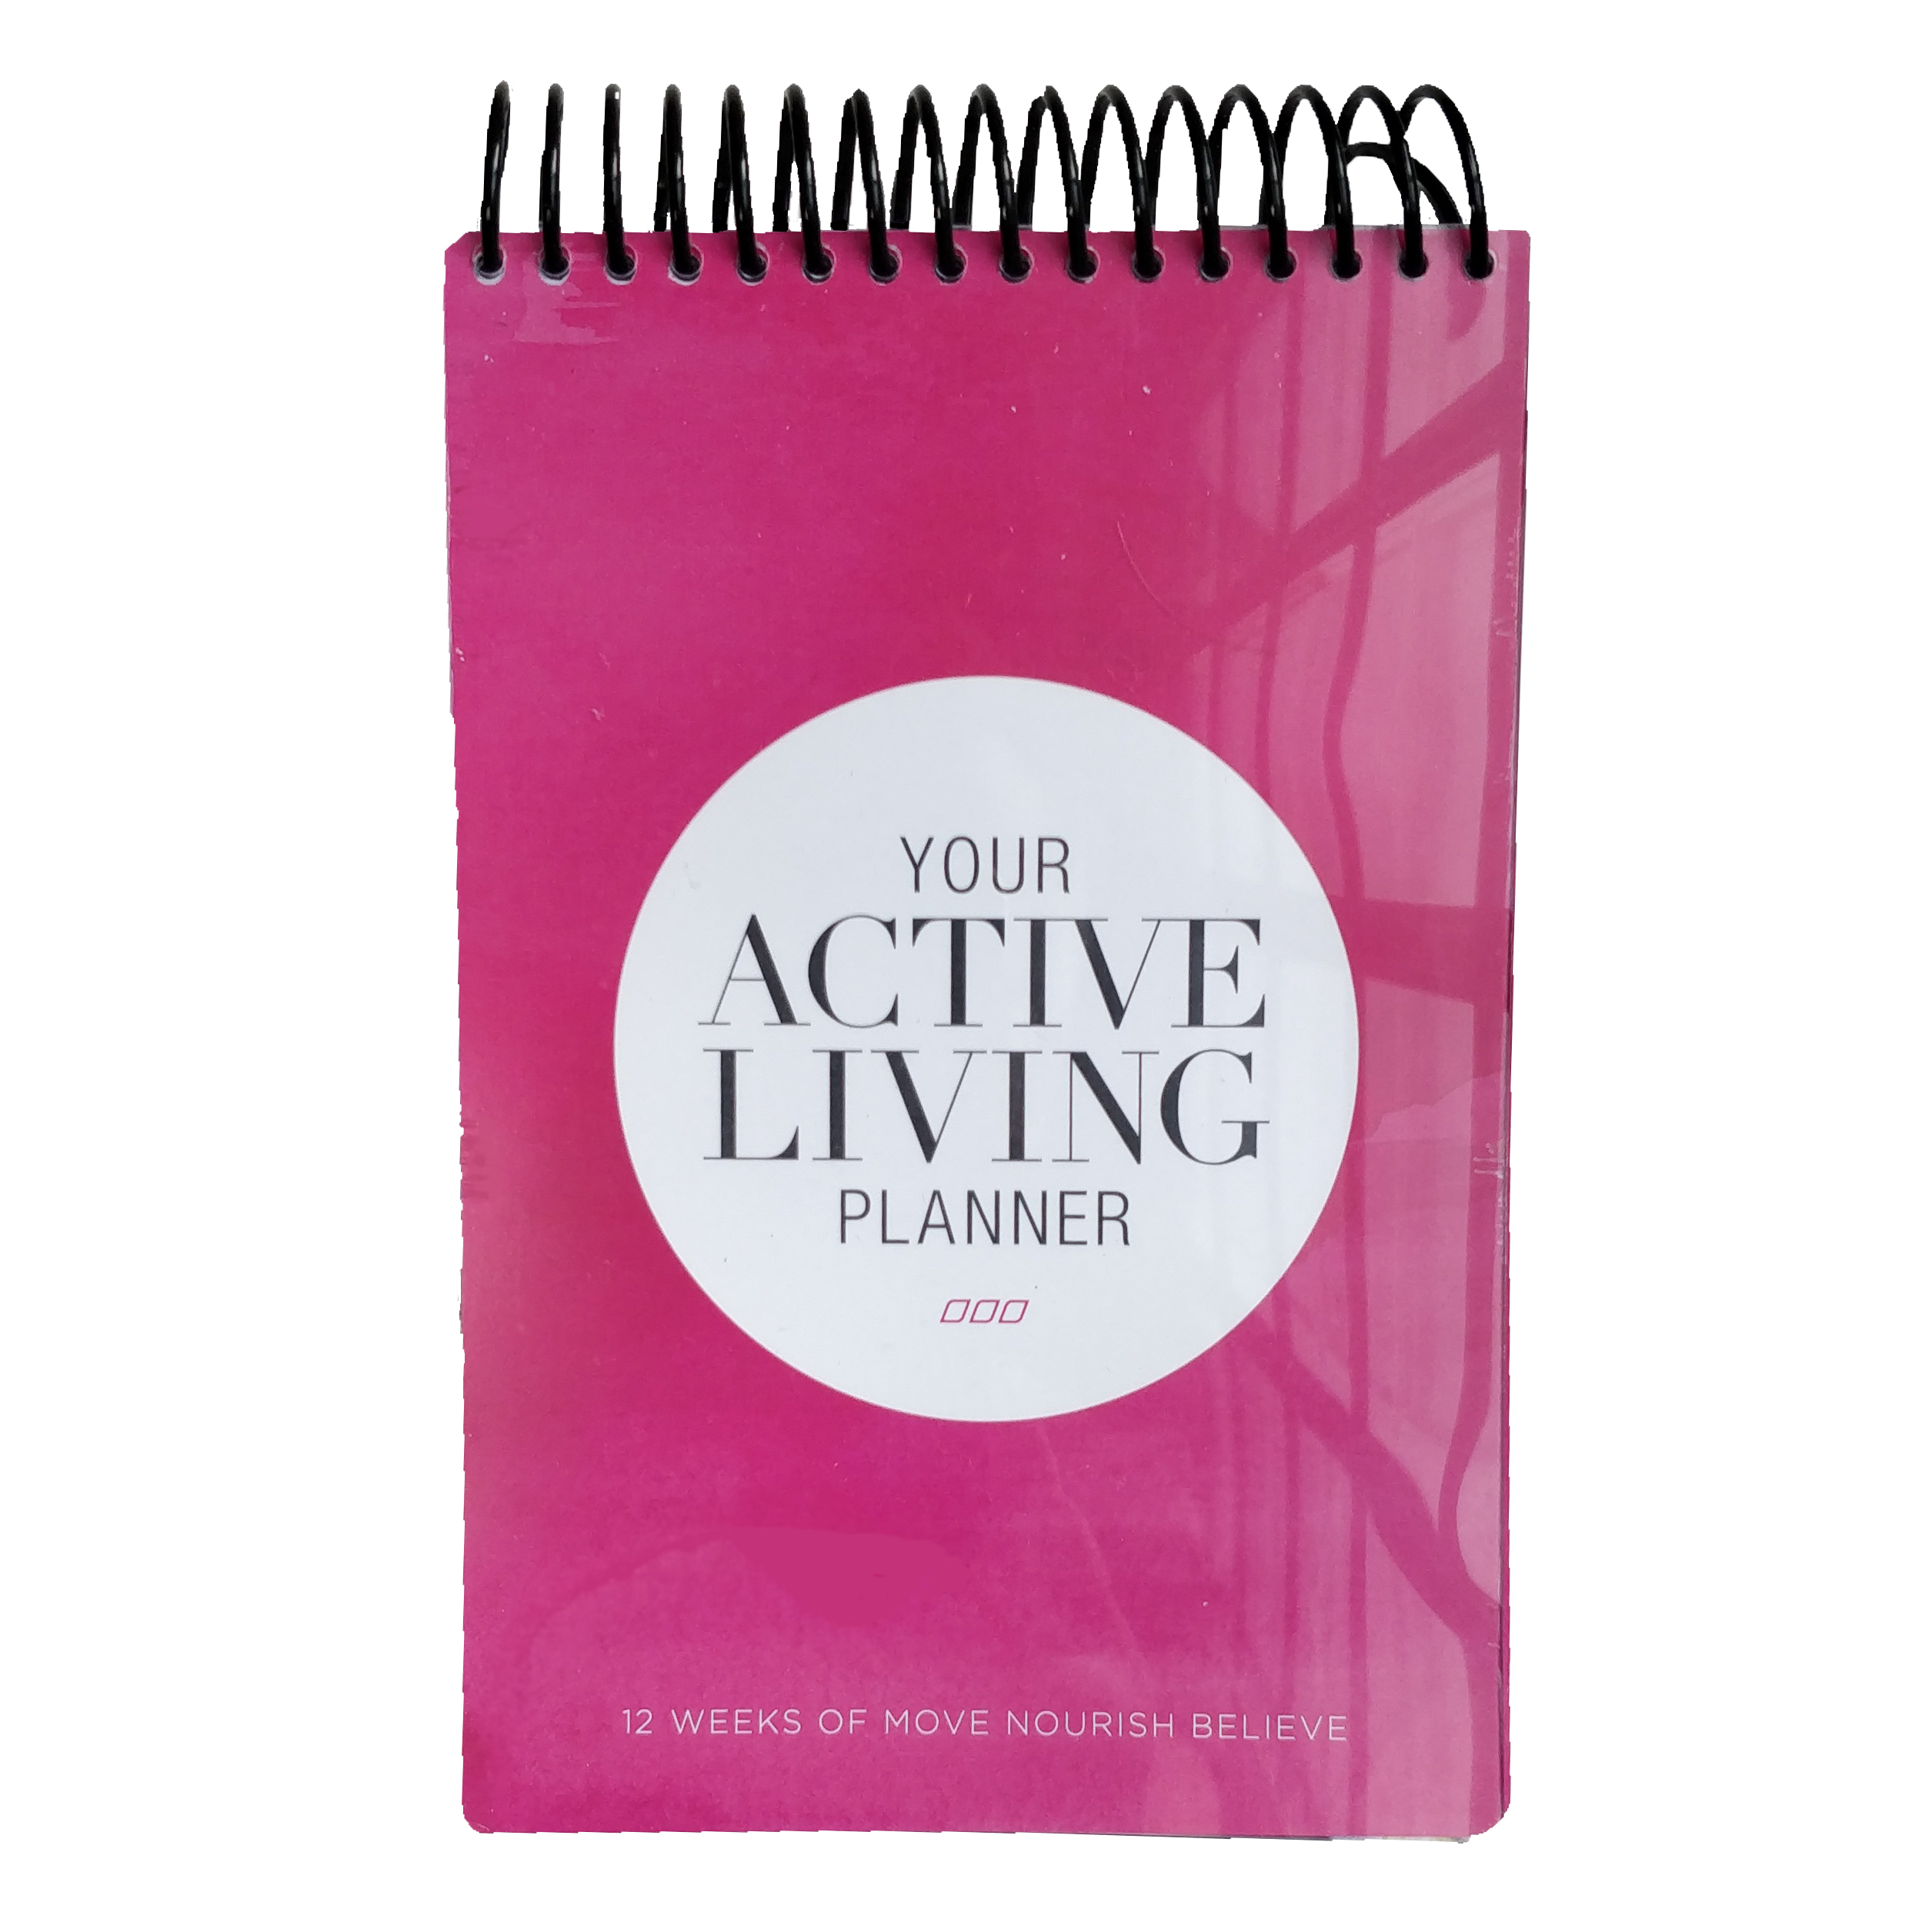 Your Active Living Planner